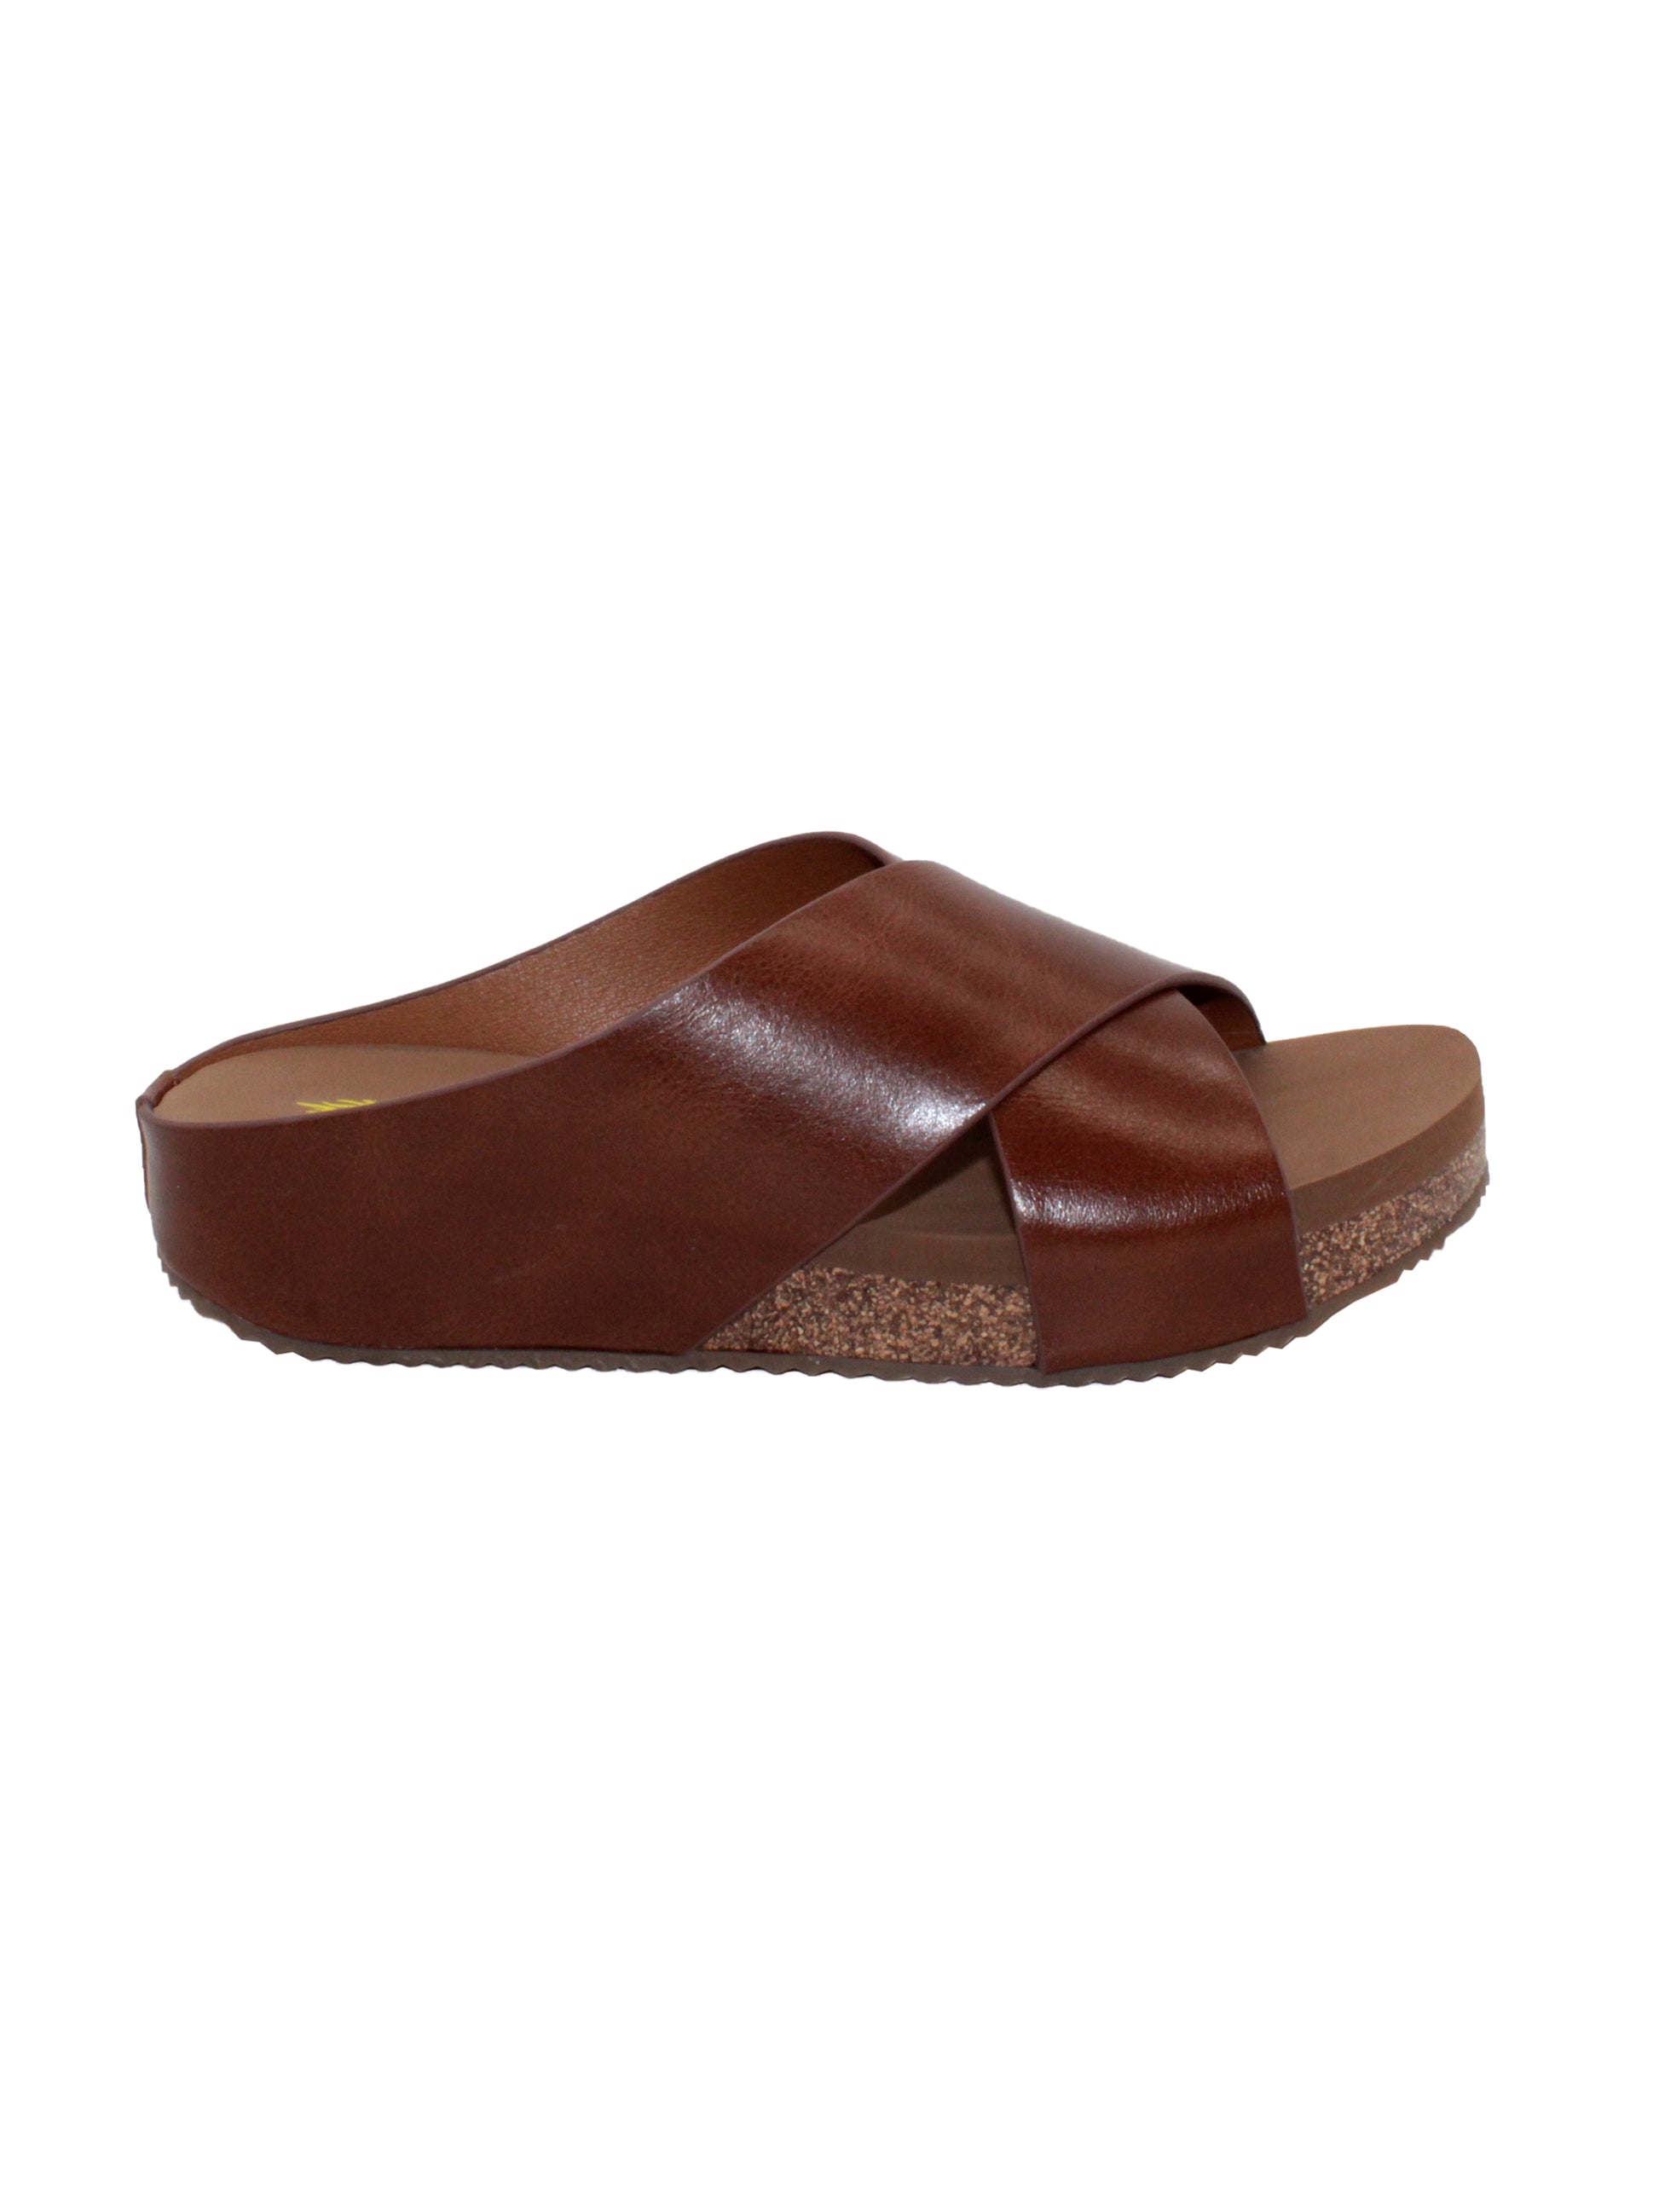 Rustic genuine leather brown Slip-on crisscross sandal style Round toe shape Ultra-comfort EVA insole Cork covered wedge Rubber traction outsole Approx. 1.25” heel height side